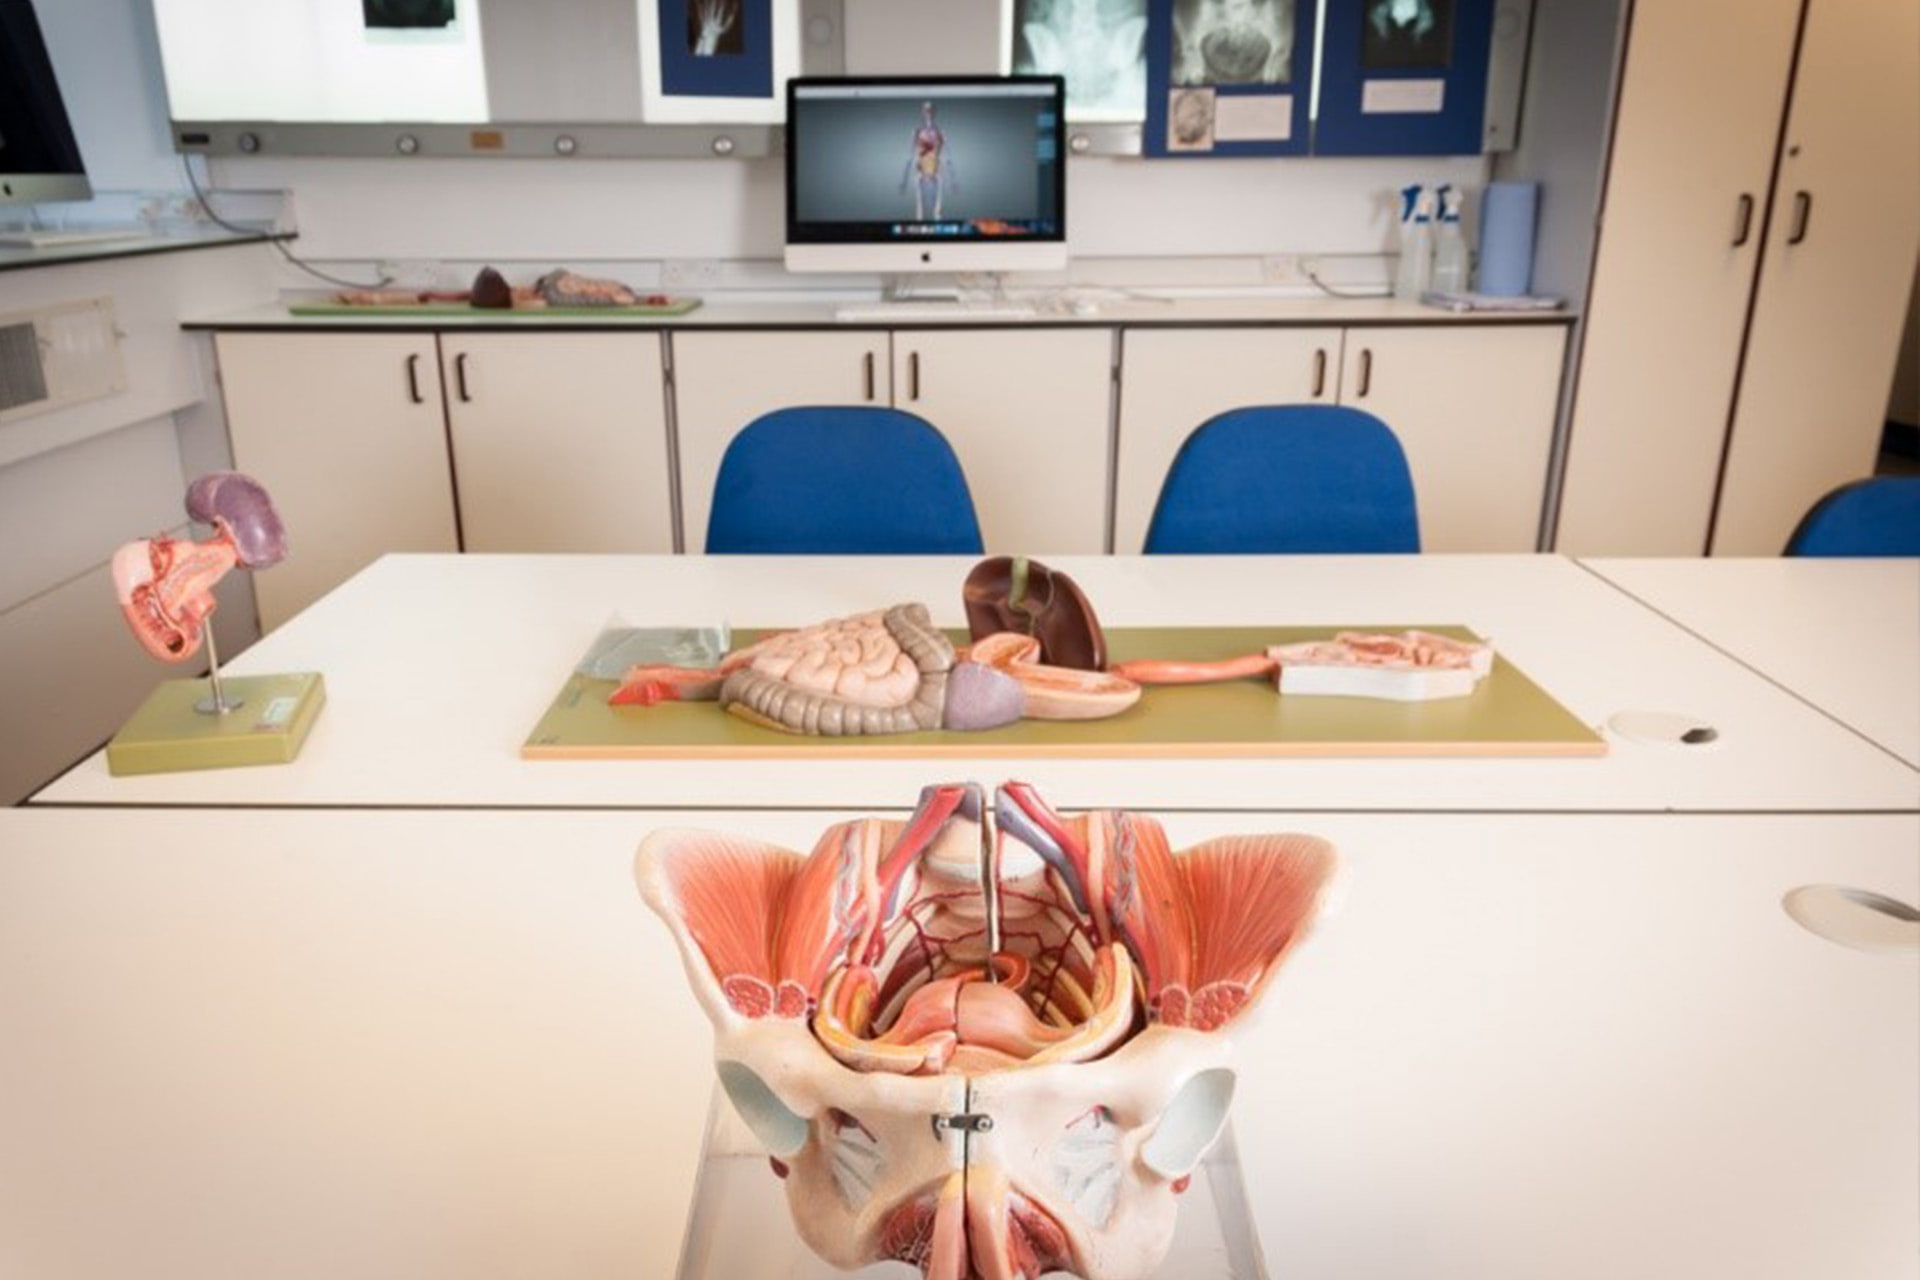 Anatomy teaching models layed out on a table